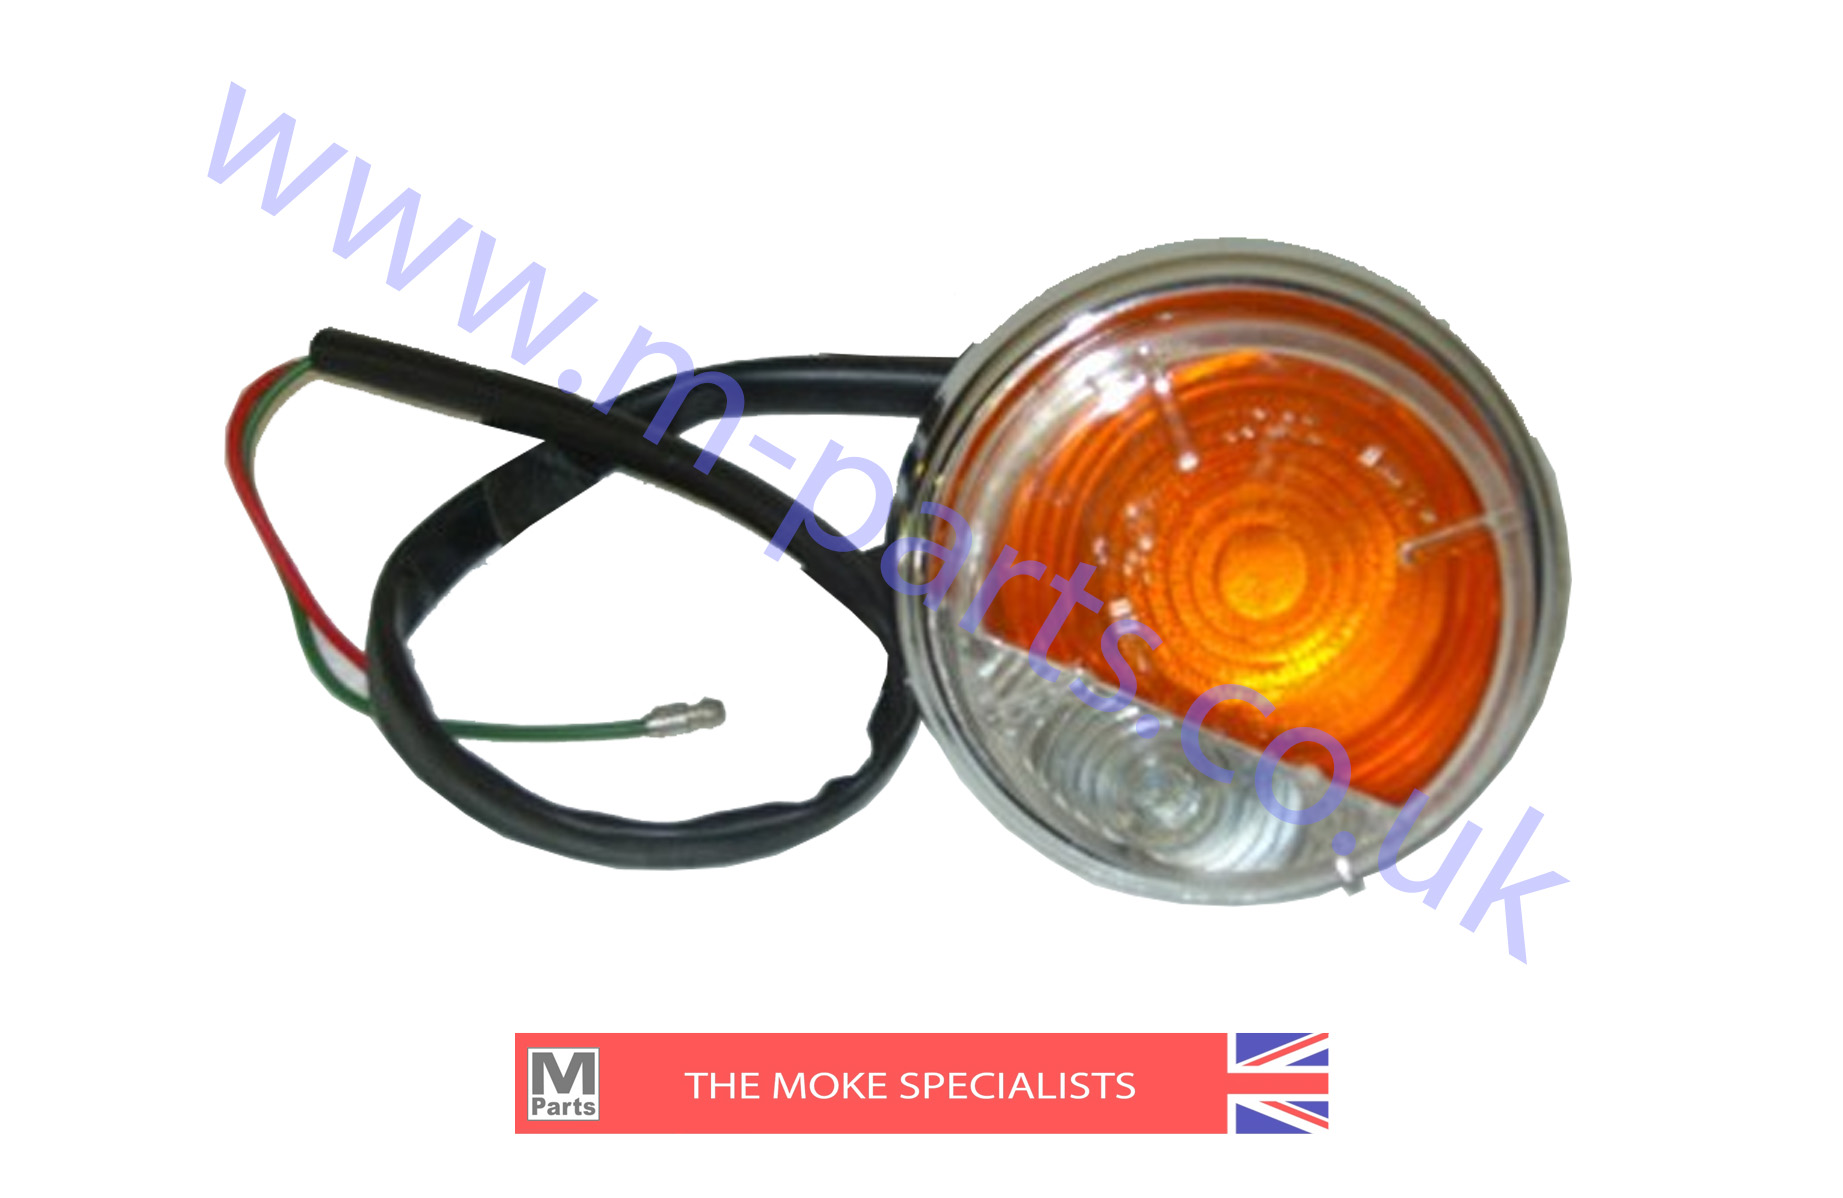 1. Front indicator and side light assembly